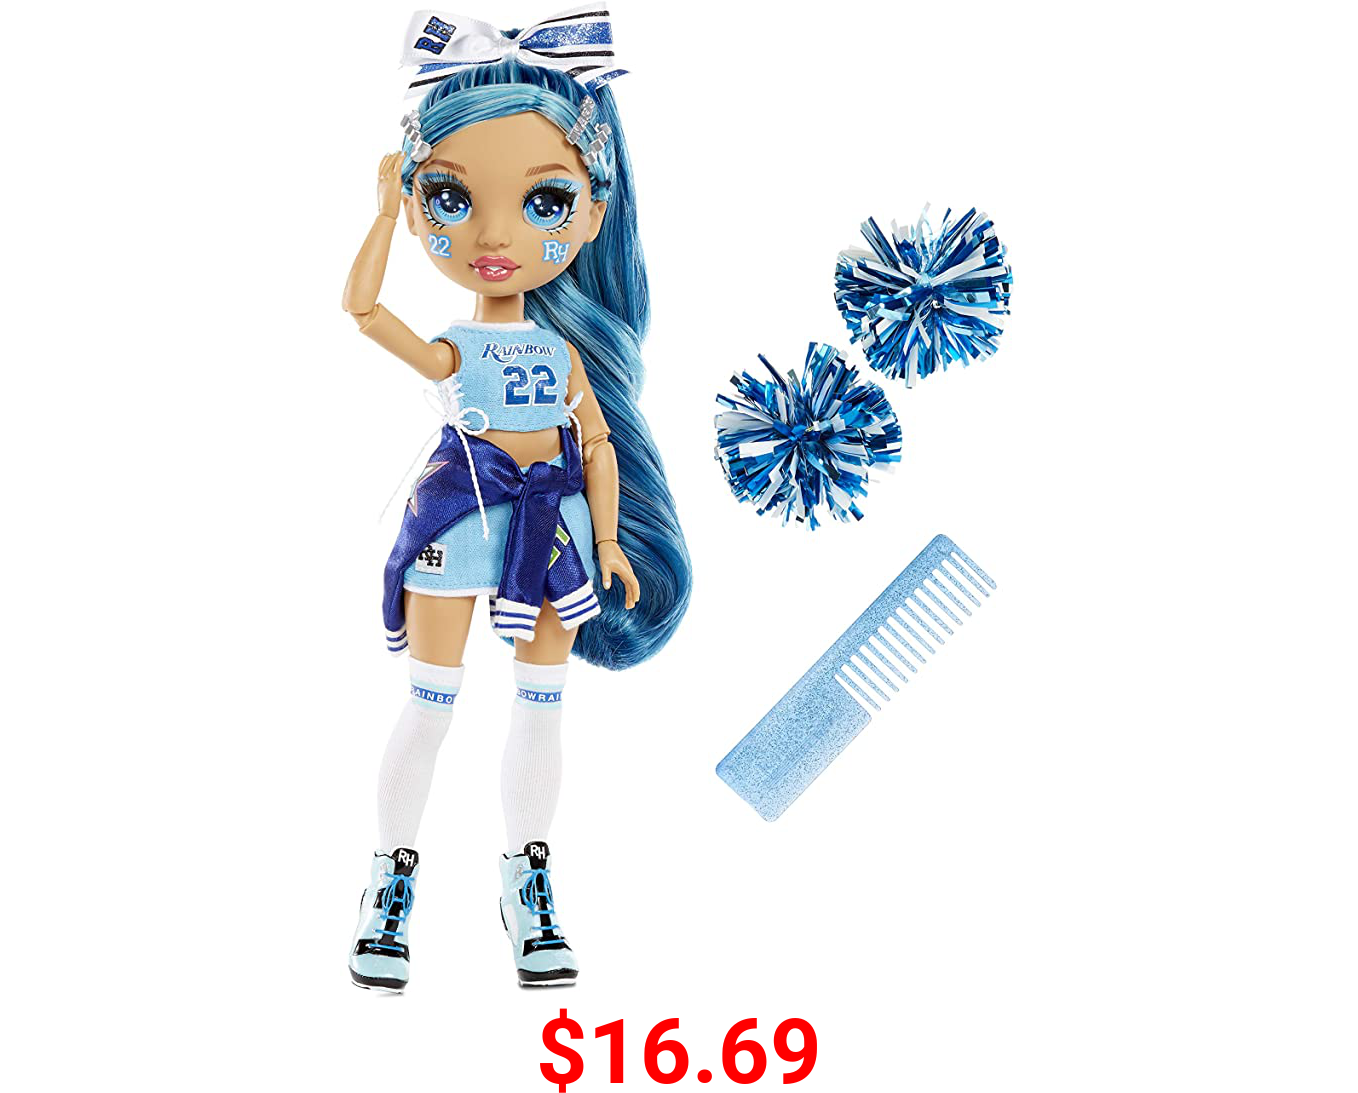 Rainbow High Cheer Skyler Bradshaw – Blue Cheerleader Fashion Doll with Pom Poms and Doll Accessories, Great for Kids 6-12 Years Old